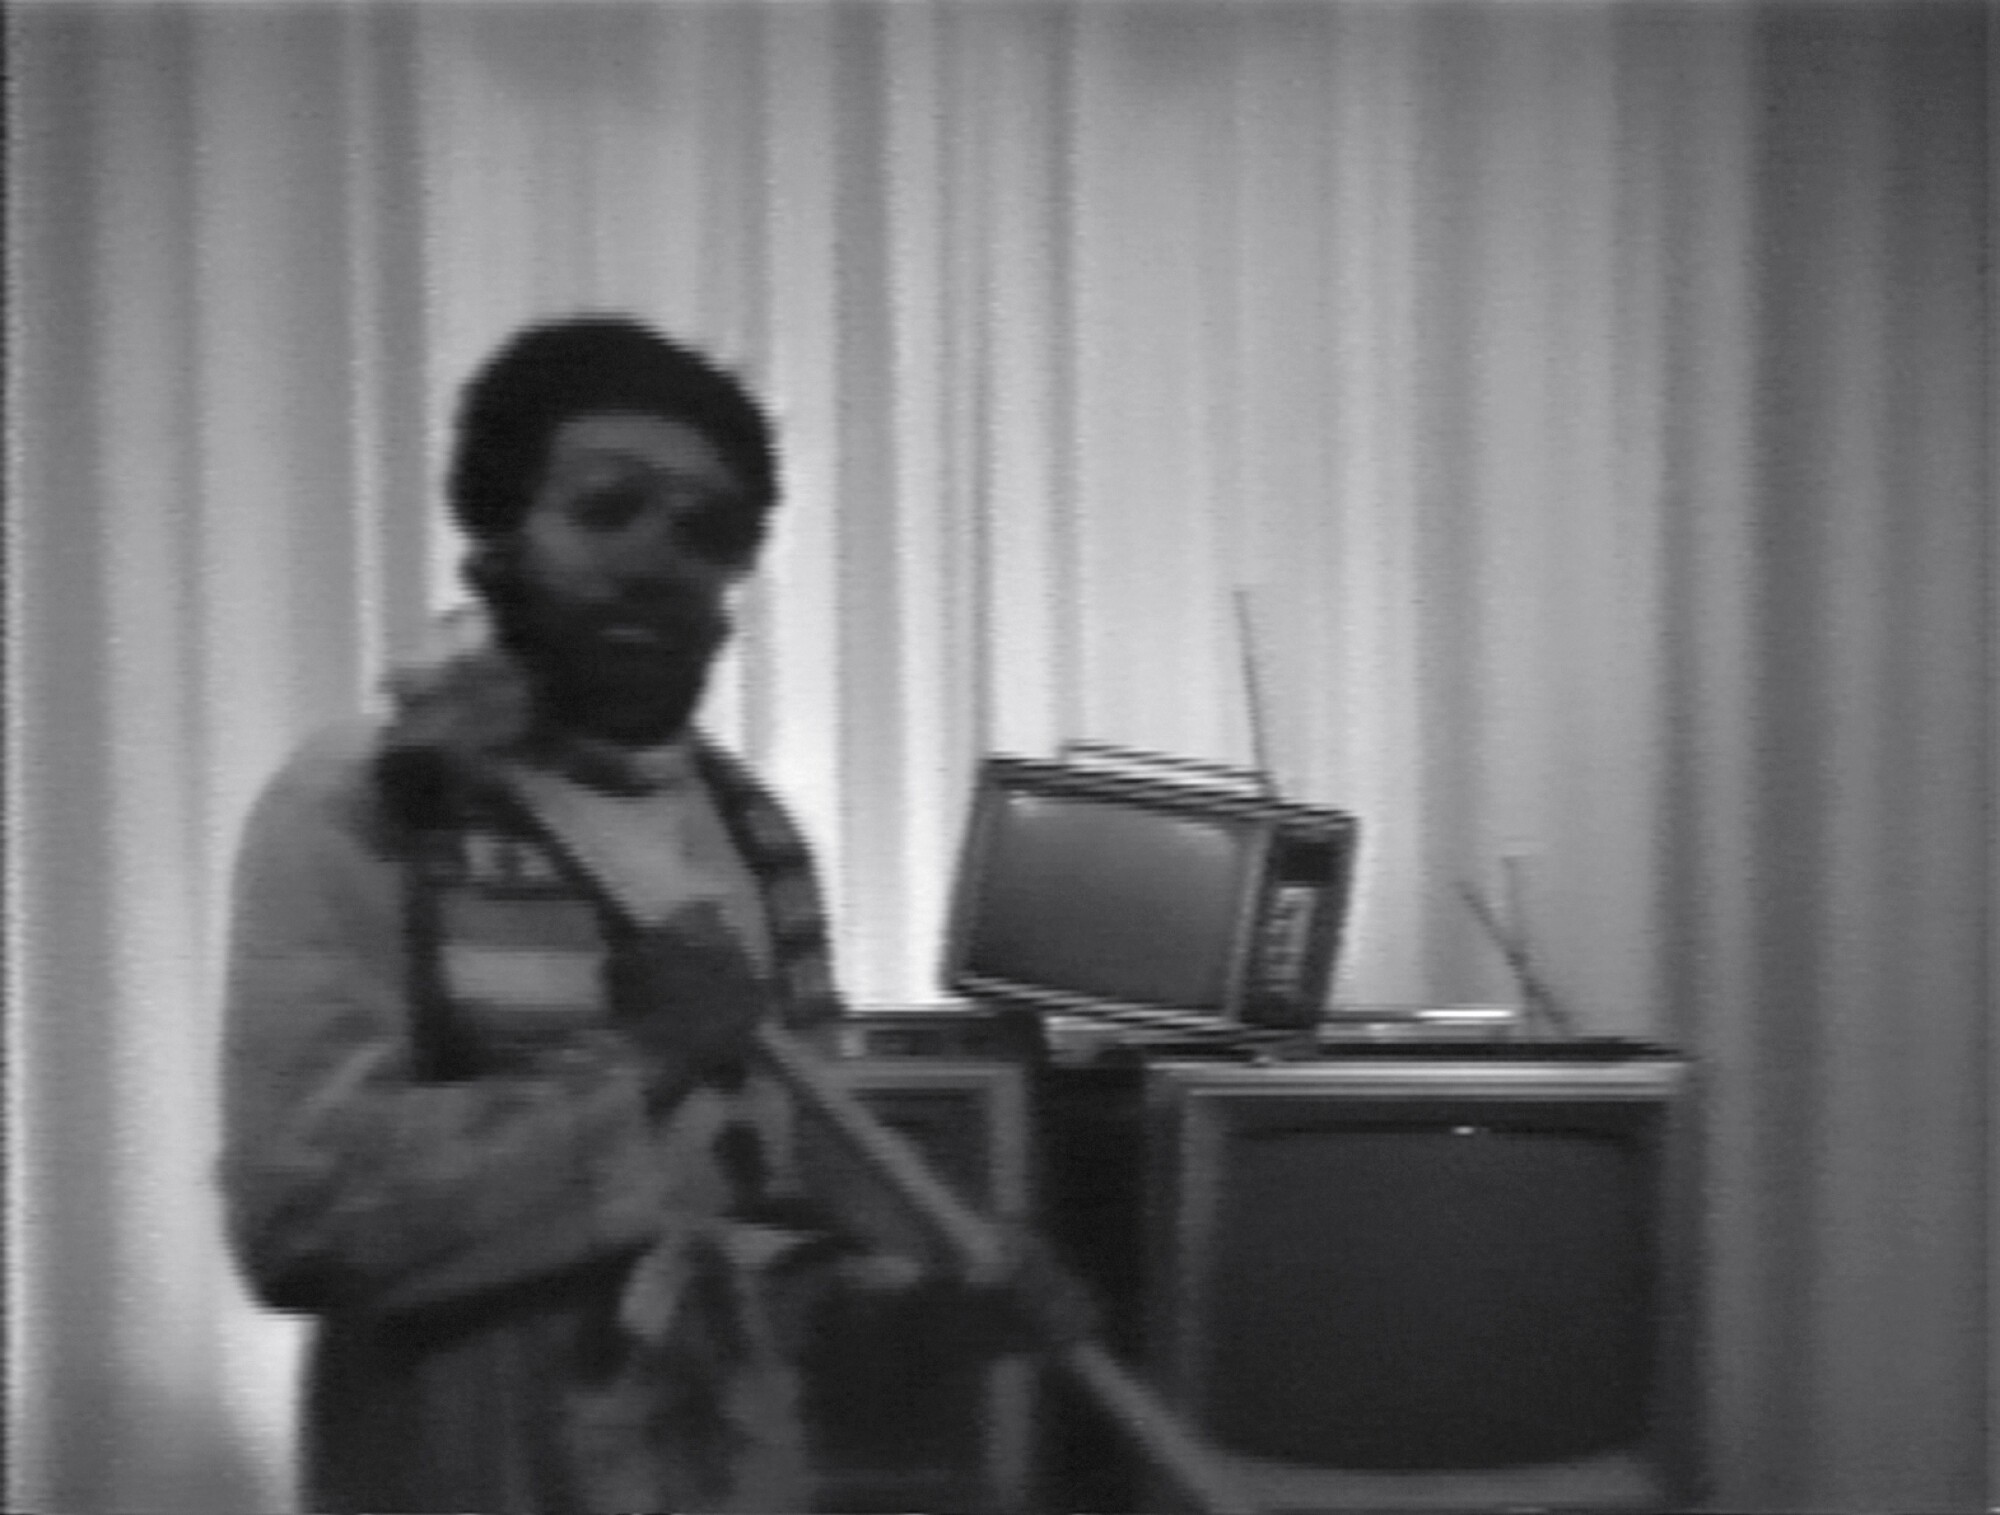 Ulysses Jenkins stands before a stack of TVs wielding a sledgehammer in a grainy black and white video still